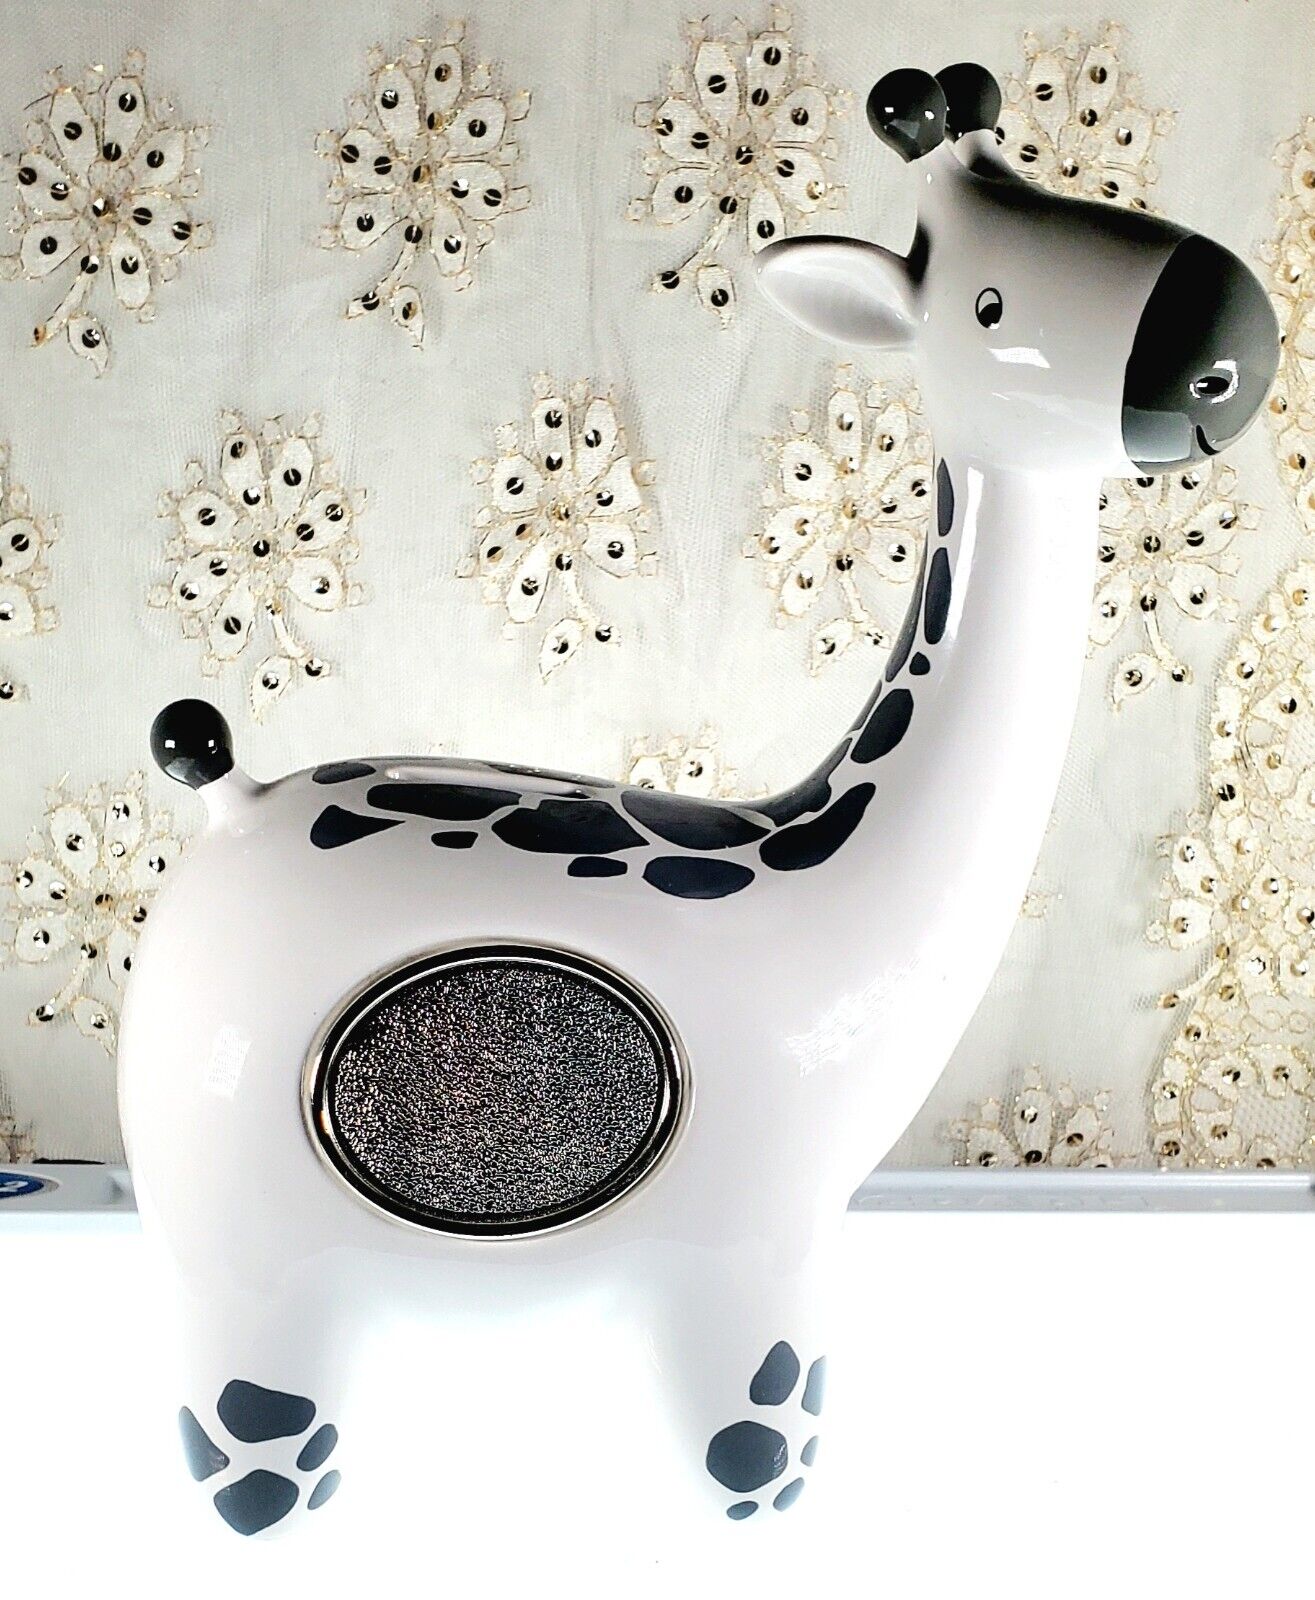 Things Remembered Engravable Ceramic Giraffe White/Grey Piggy Bank Ex. Condition